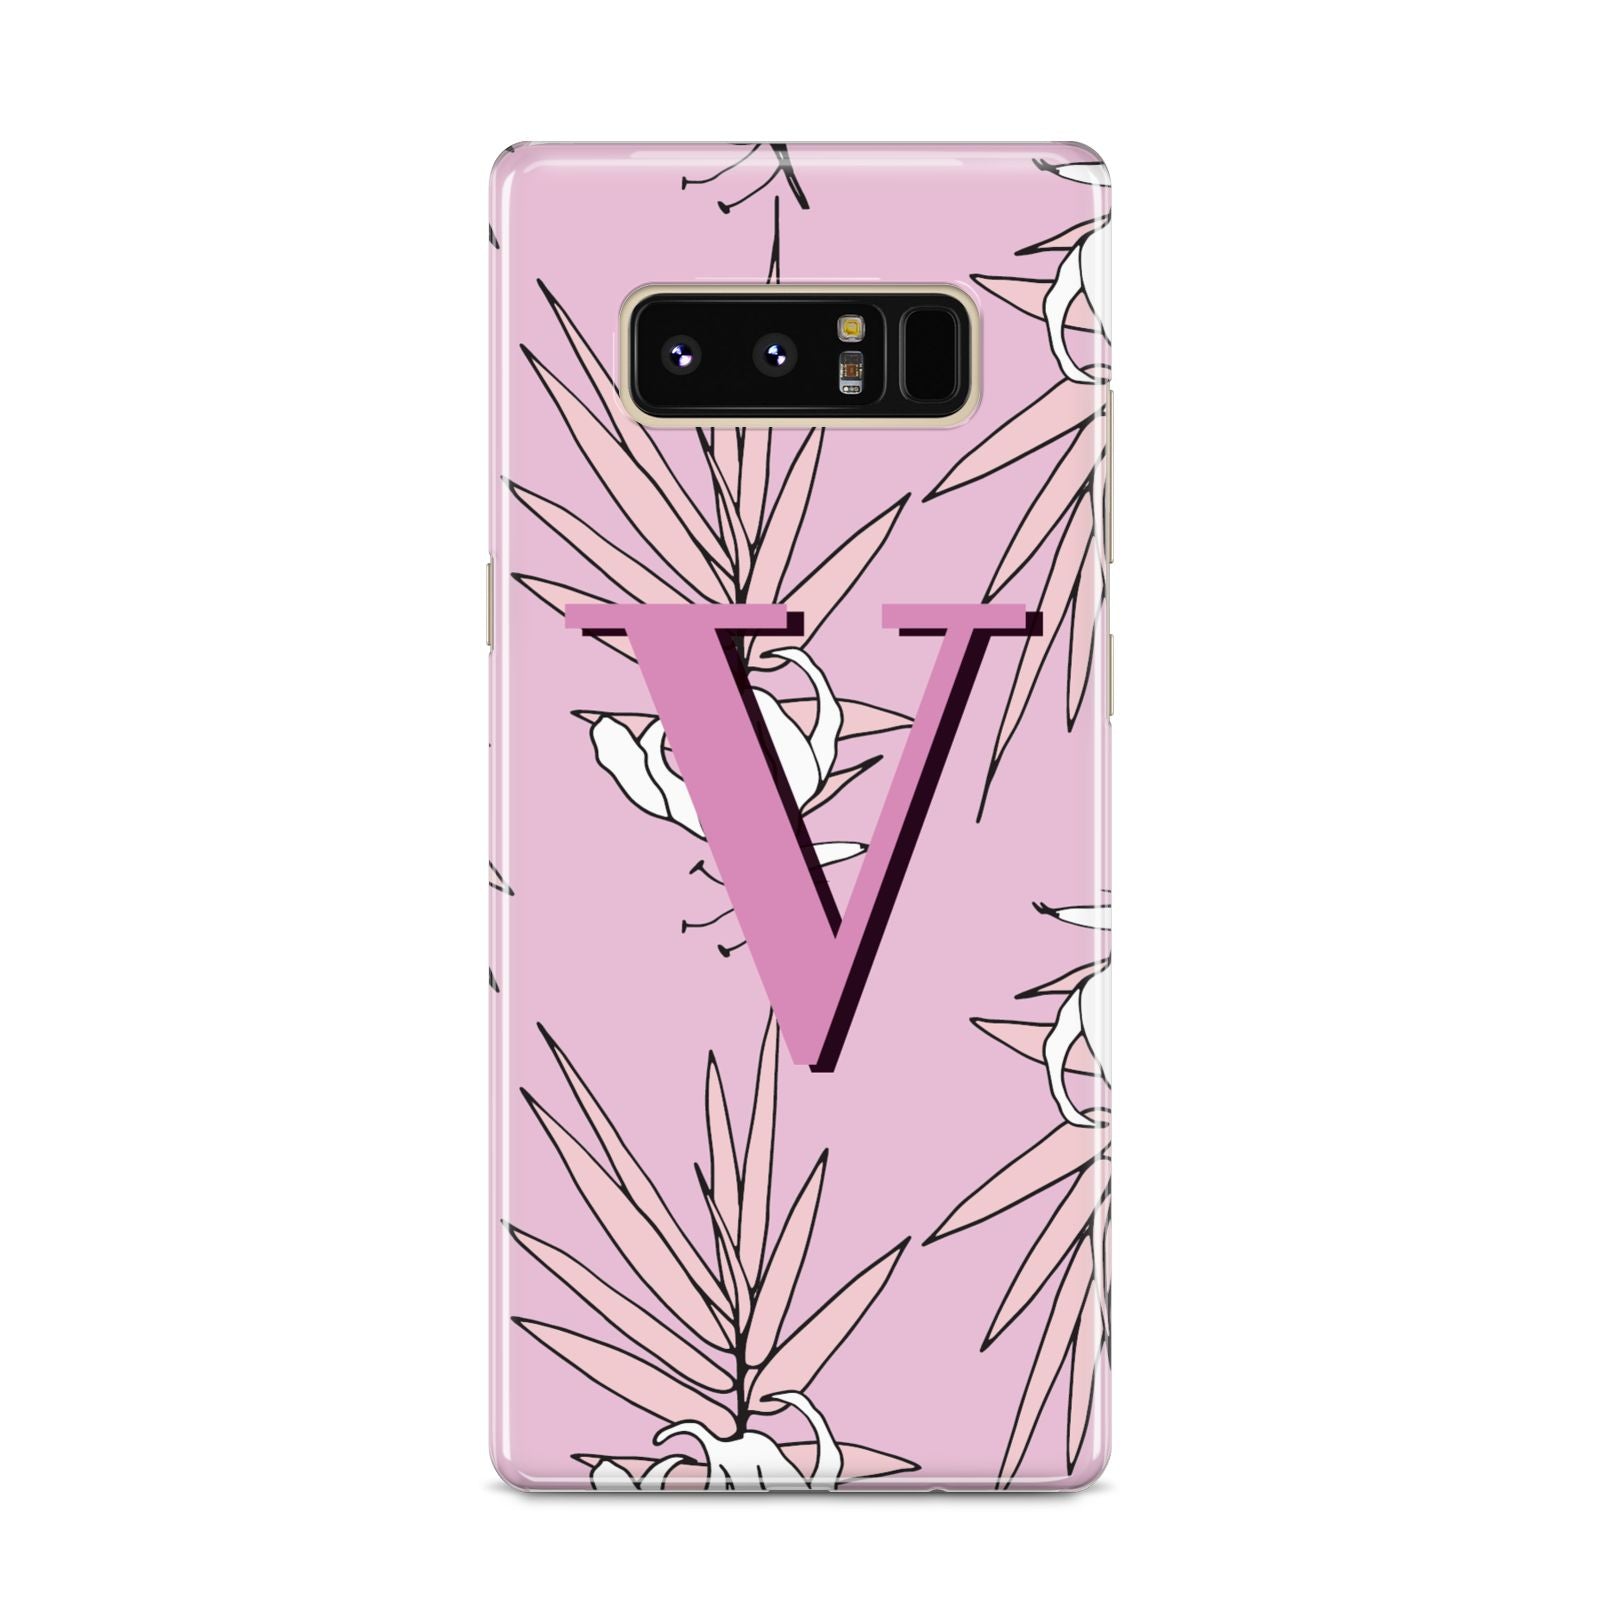 Personalised Pink and White Floral Monogram Samsung Galaxy S8 Case